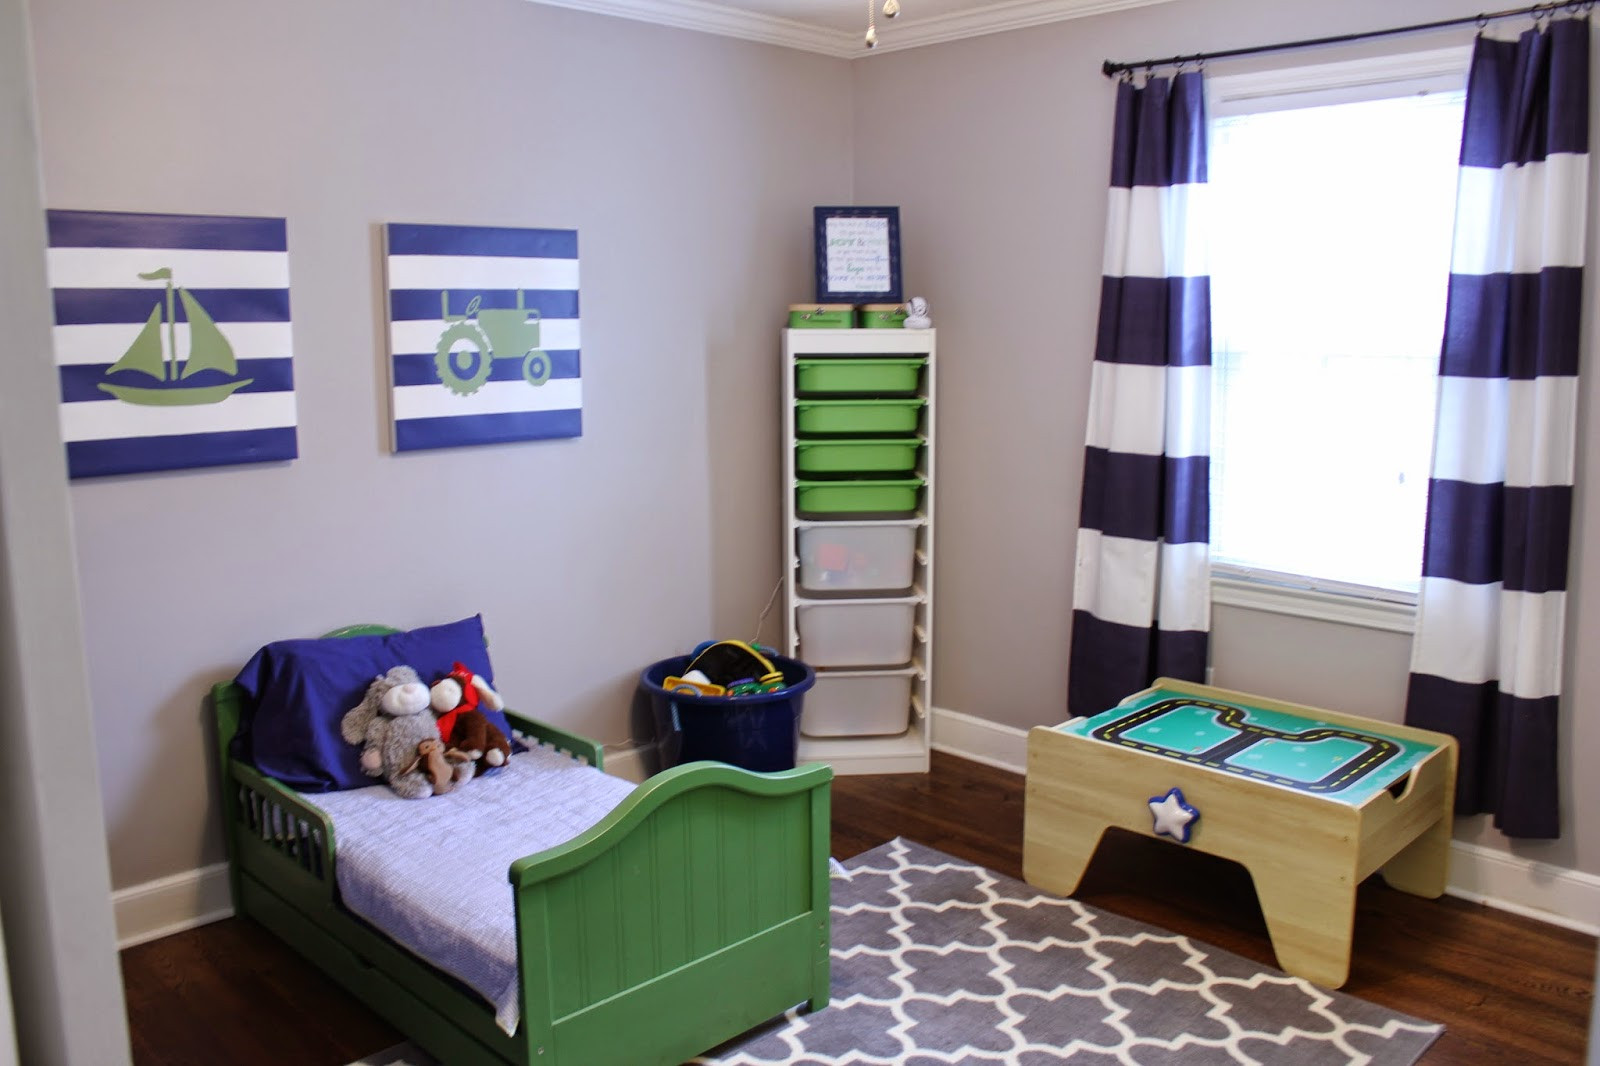 Toddler Boy Bedroom Ideas
 Toddler Room Ideas for Boy – Finding the perfect Room